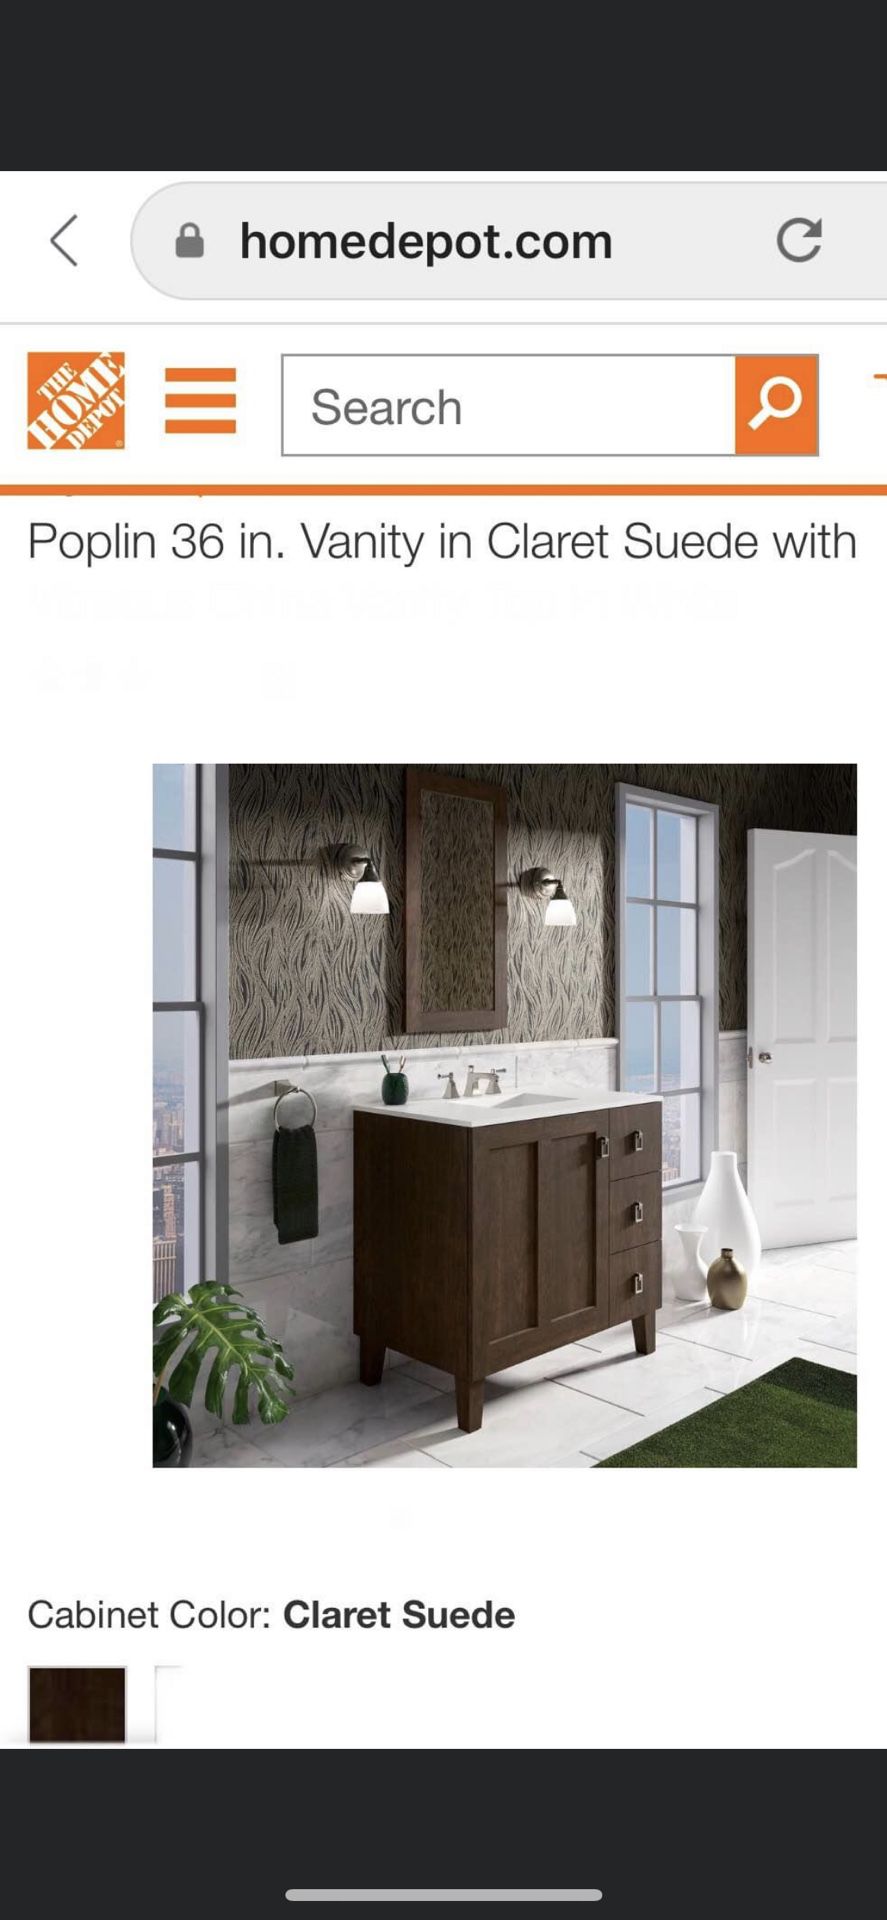 KOHLER 36in. Vanity Cabinet in Claret Suede Brand new Never been used For only $499 & for today only $299 Retail for $1641